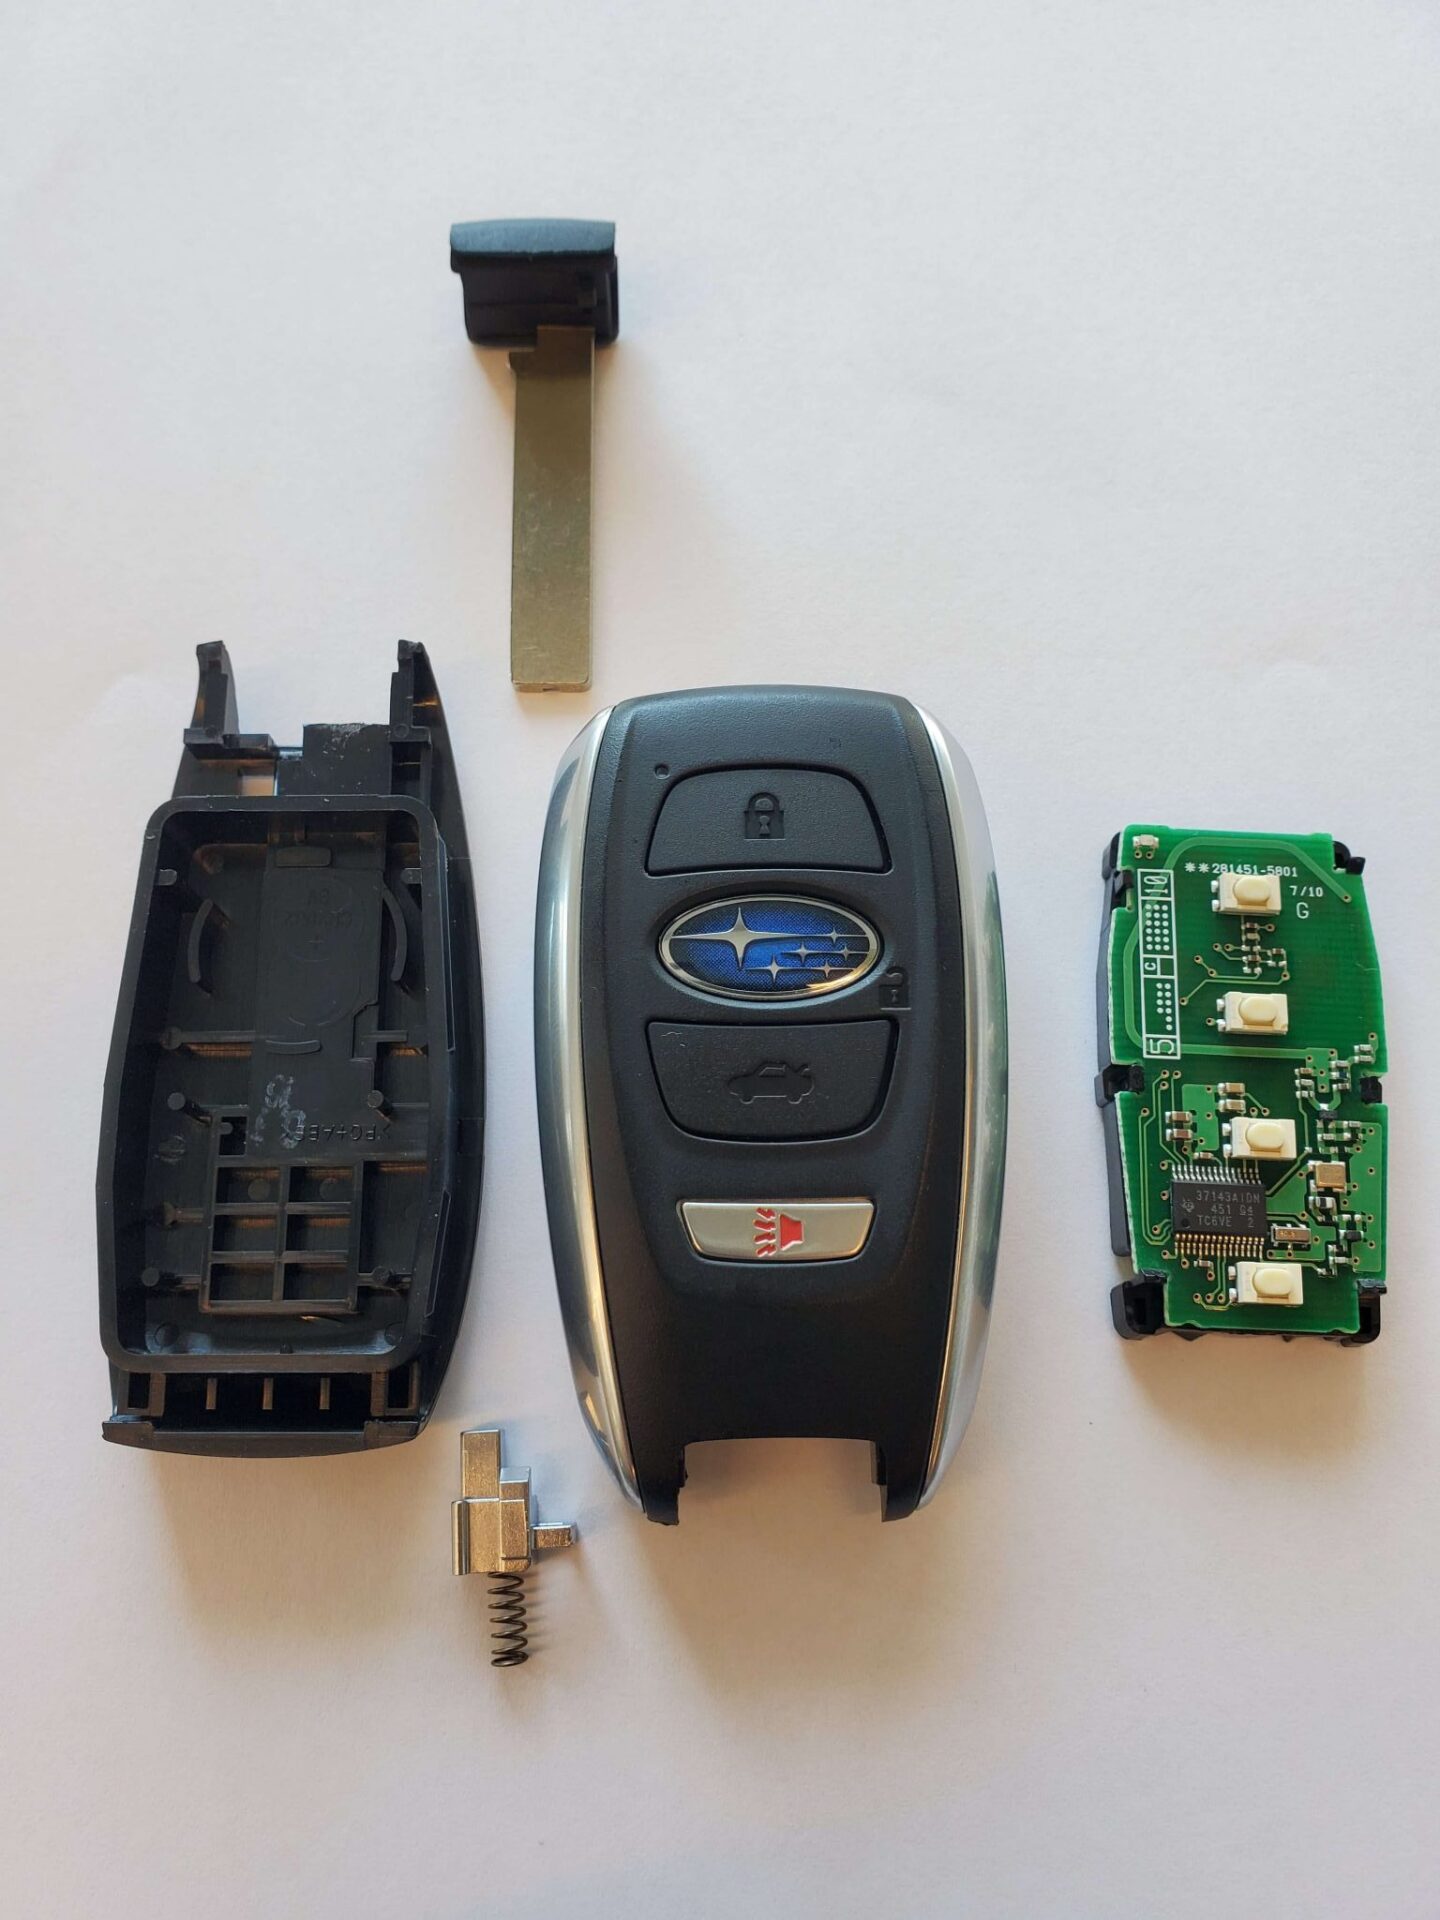 How To Change Subaru Key Fob Battery Subaru Key Fob Battery Replacement - Easy DIY Videos, Costs & More